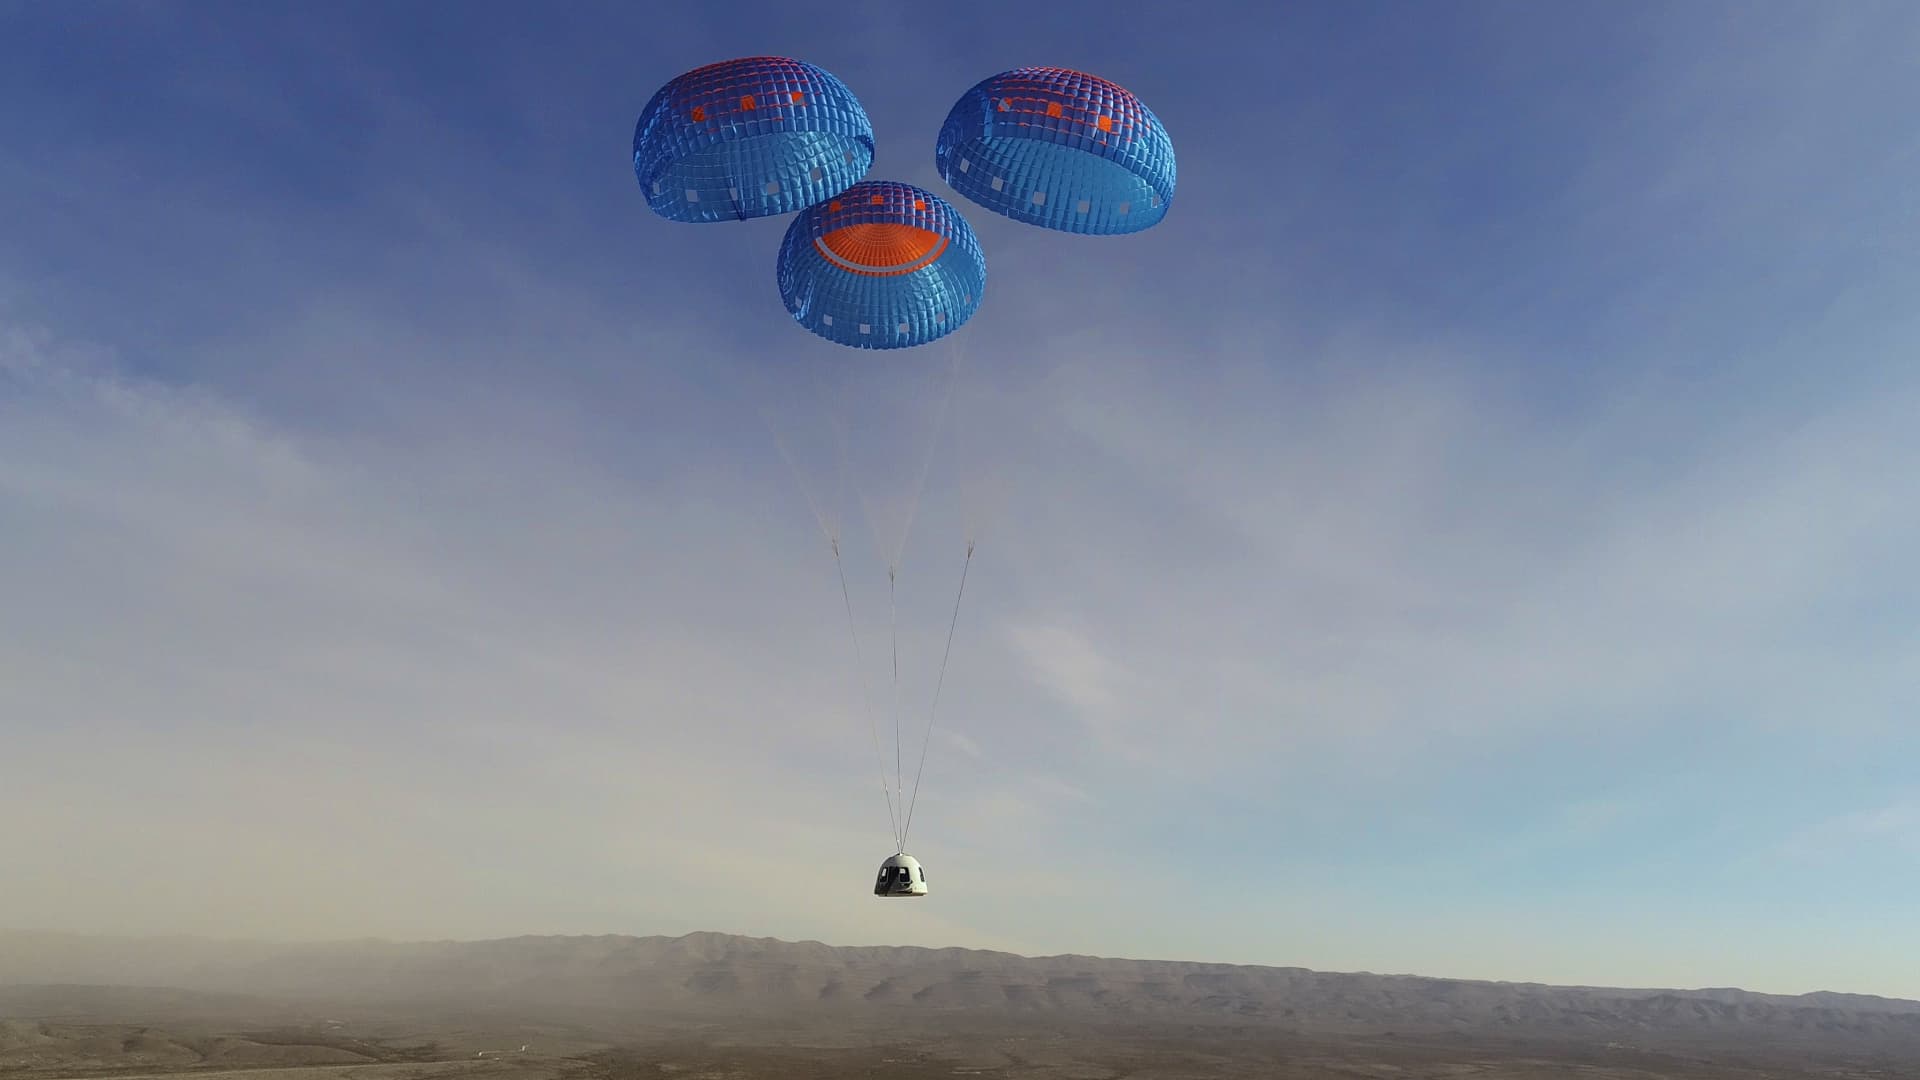 The New Shepard capsule returns under three parachutes for landing during the NS-14 test flight in January 2021.